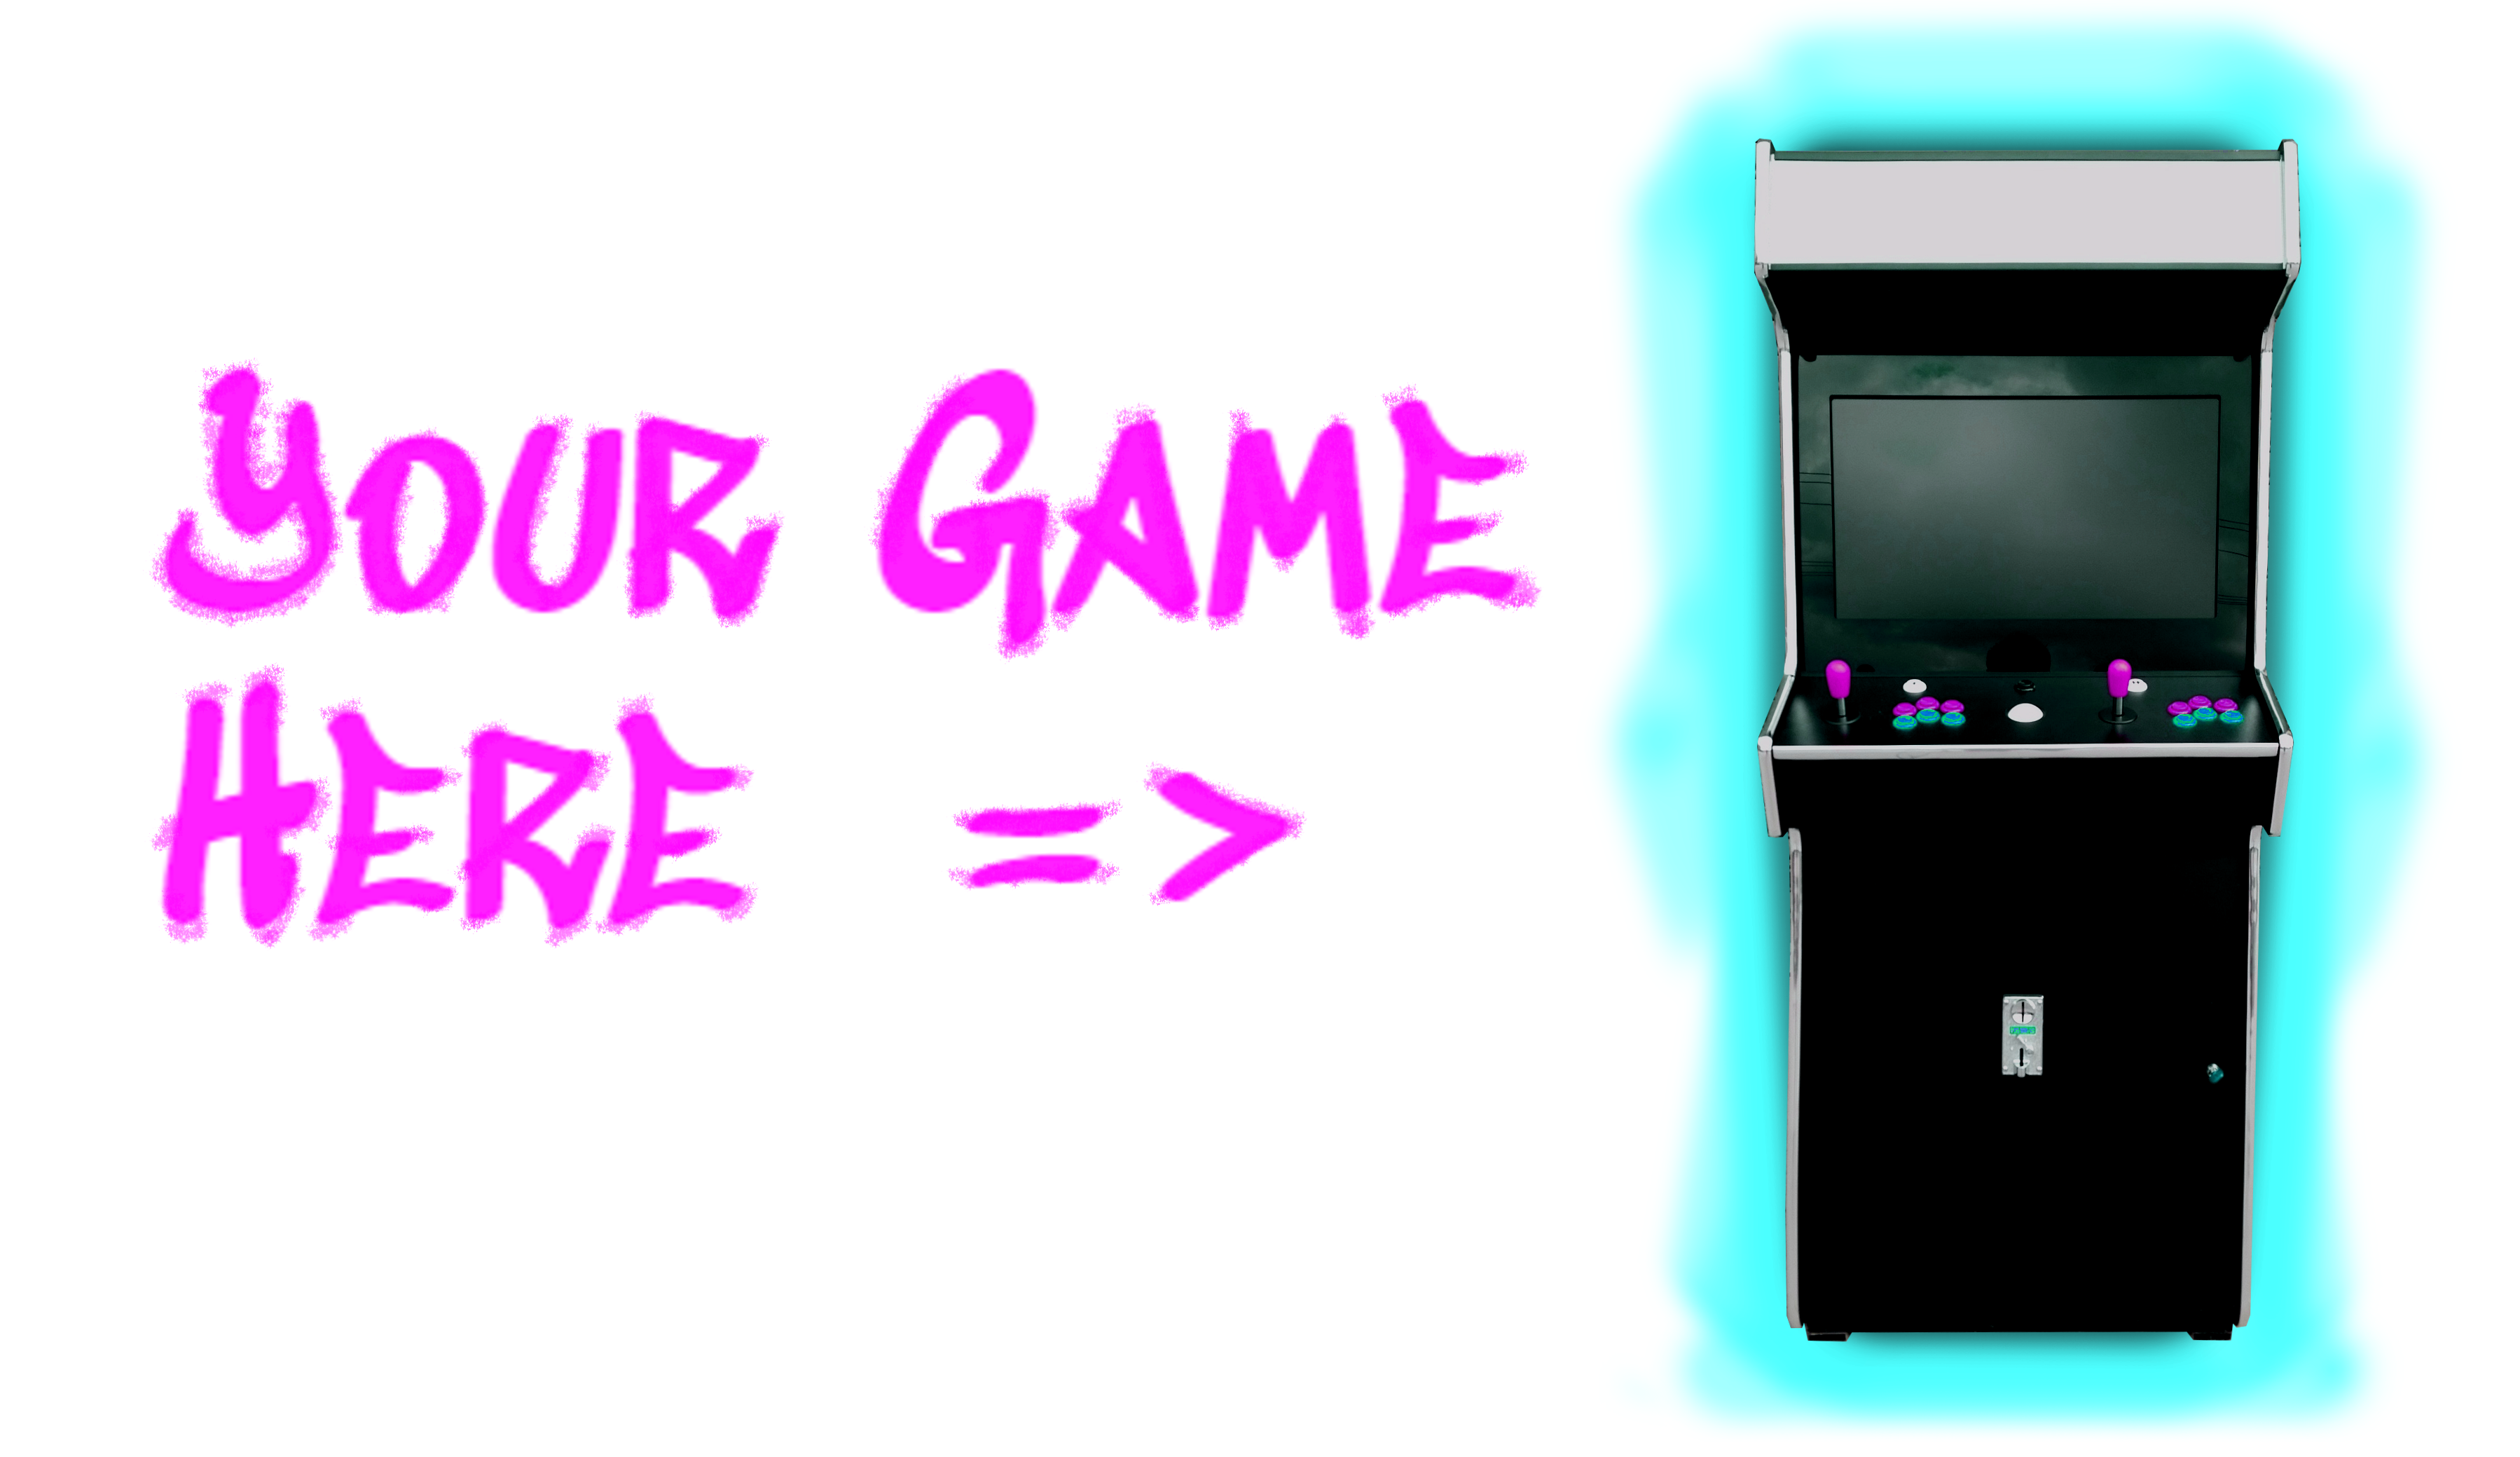 Your Game Here!